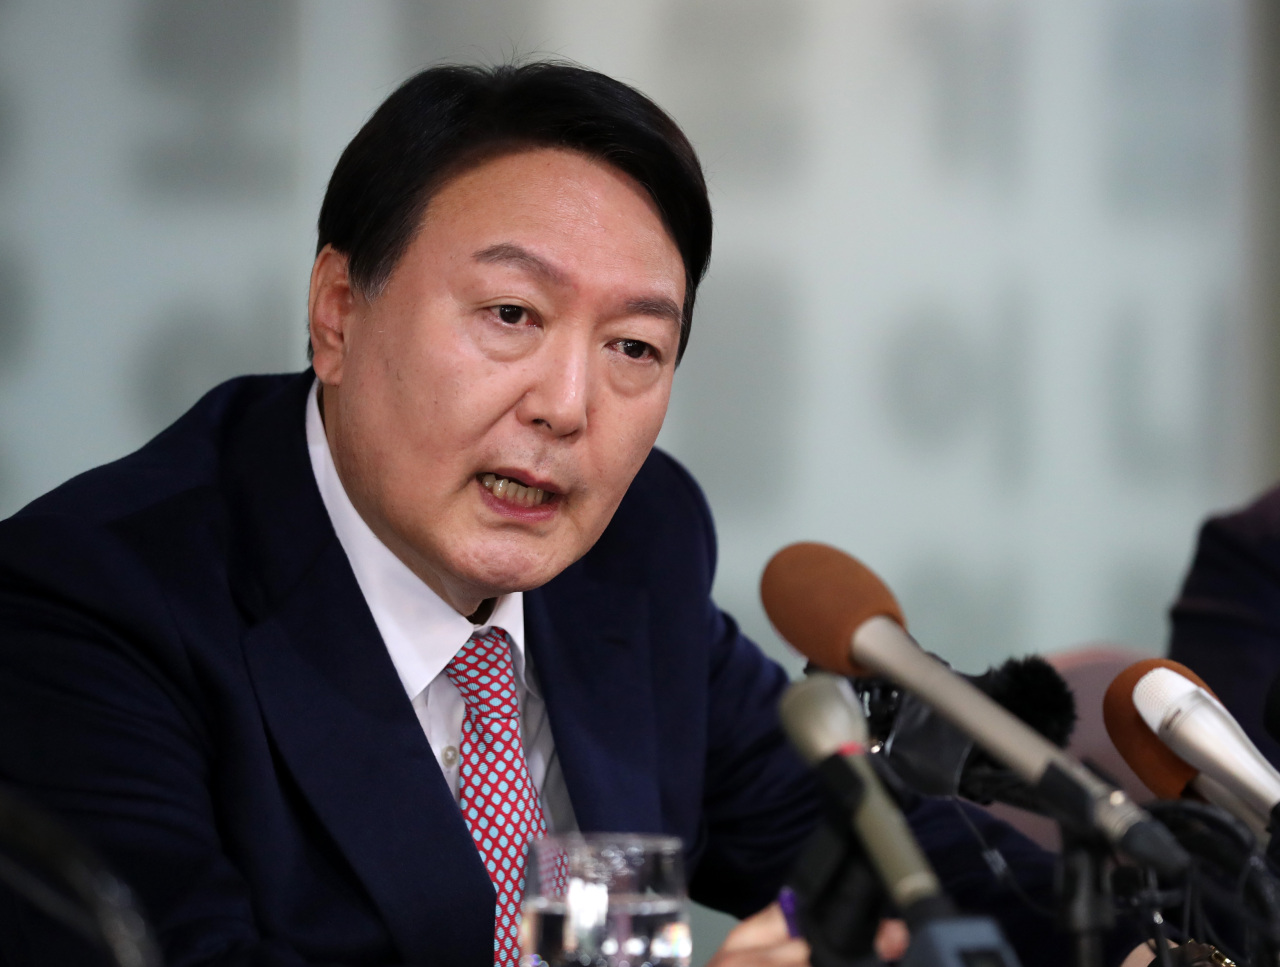 Former Prosecutor General Yoon Seok-youl, presidential nominee for the main opposition People Power Party, speaks Friday during a press conference held in Jung-gu, central Seoul. (Joint Press Corps)